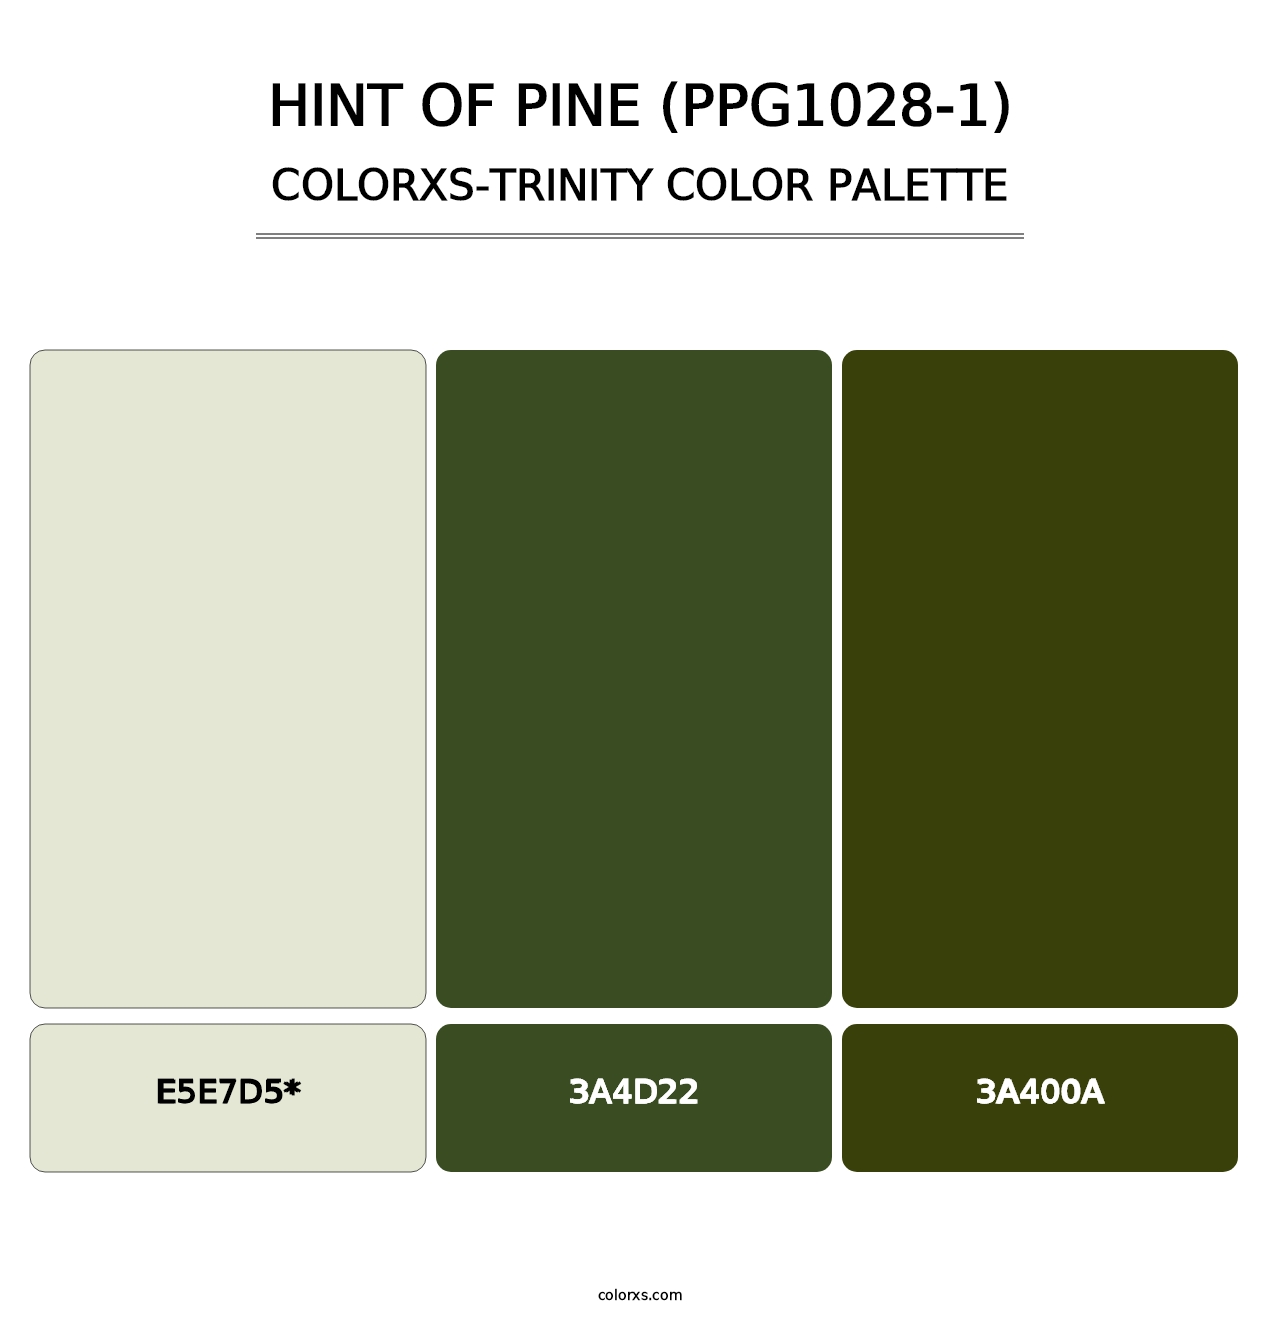 Hint Of Pine (PPG1028-1) - Colorxs Trinity Palette